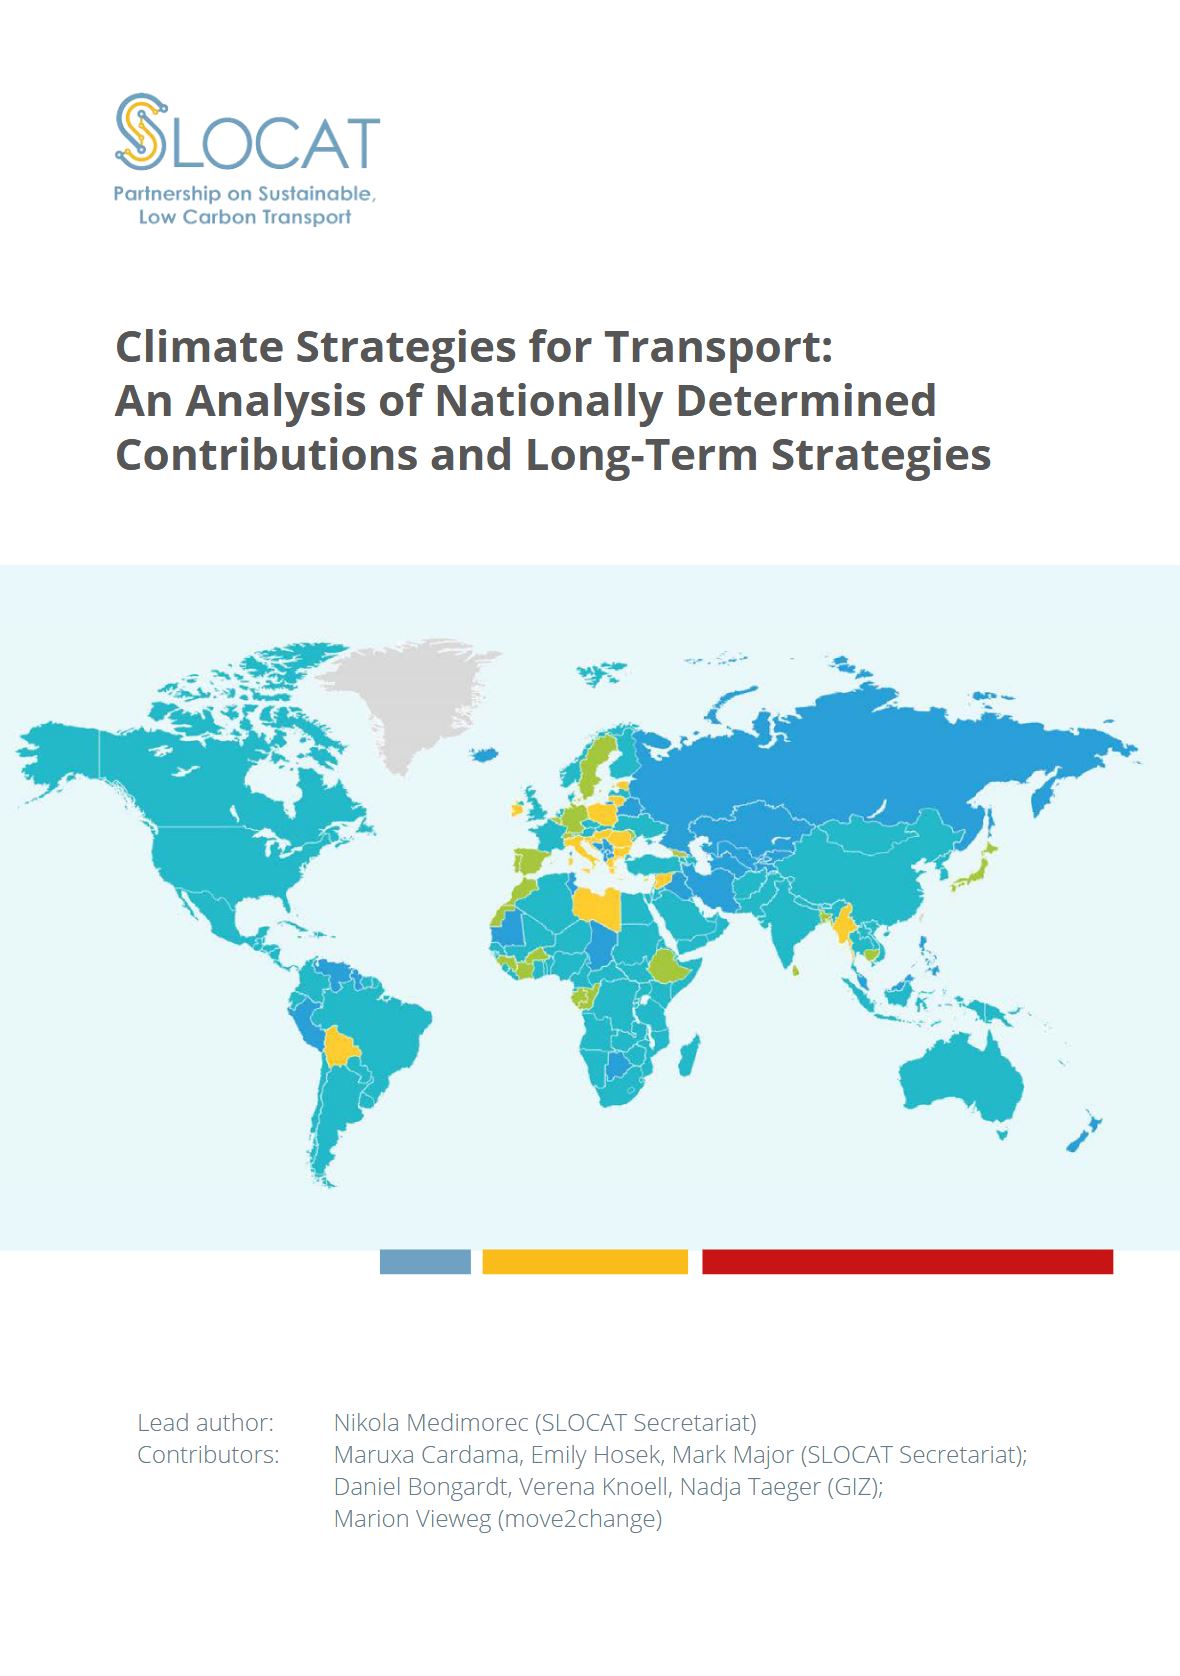 Climate Strategies for Transport: An Analysis of Nationally Determined Contributions and Long-Term Strategies